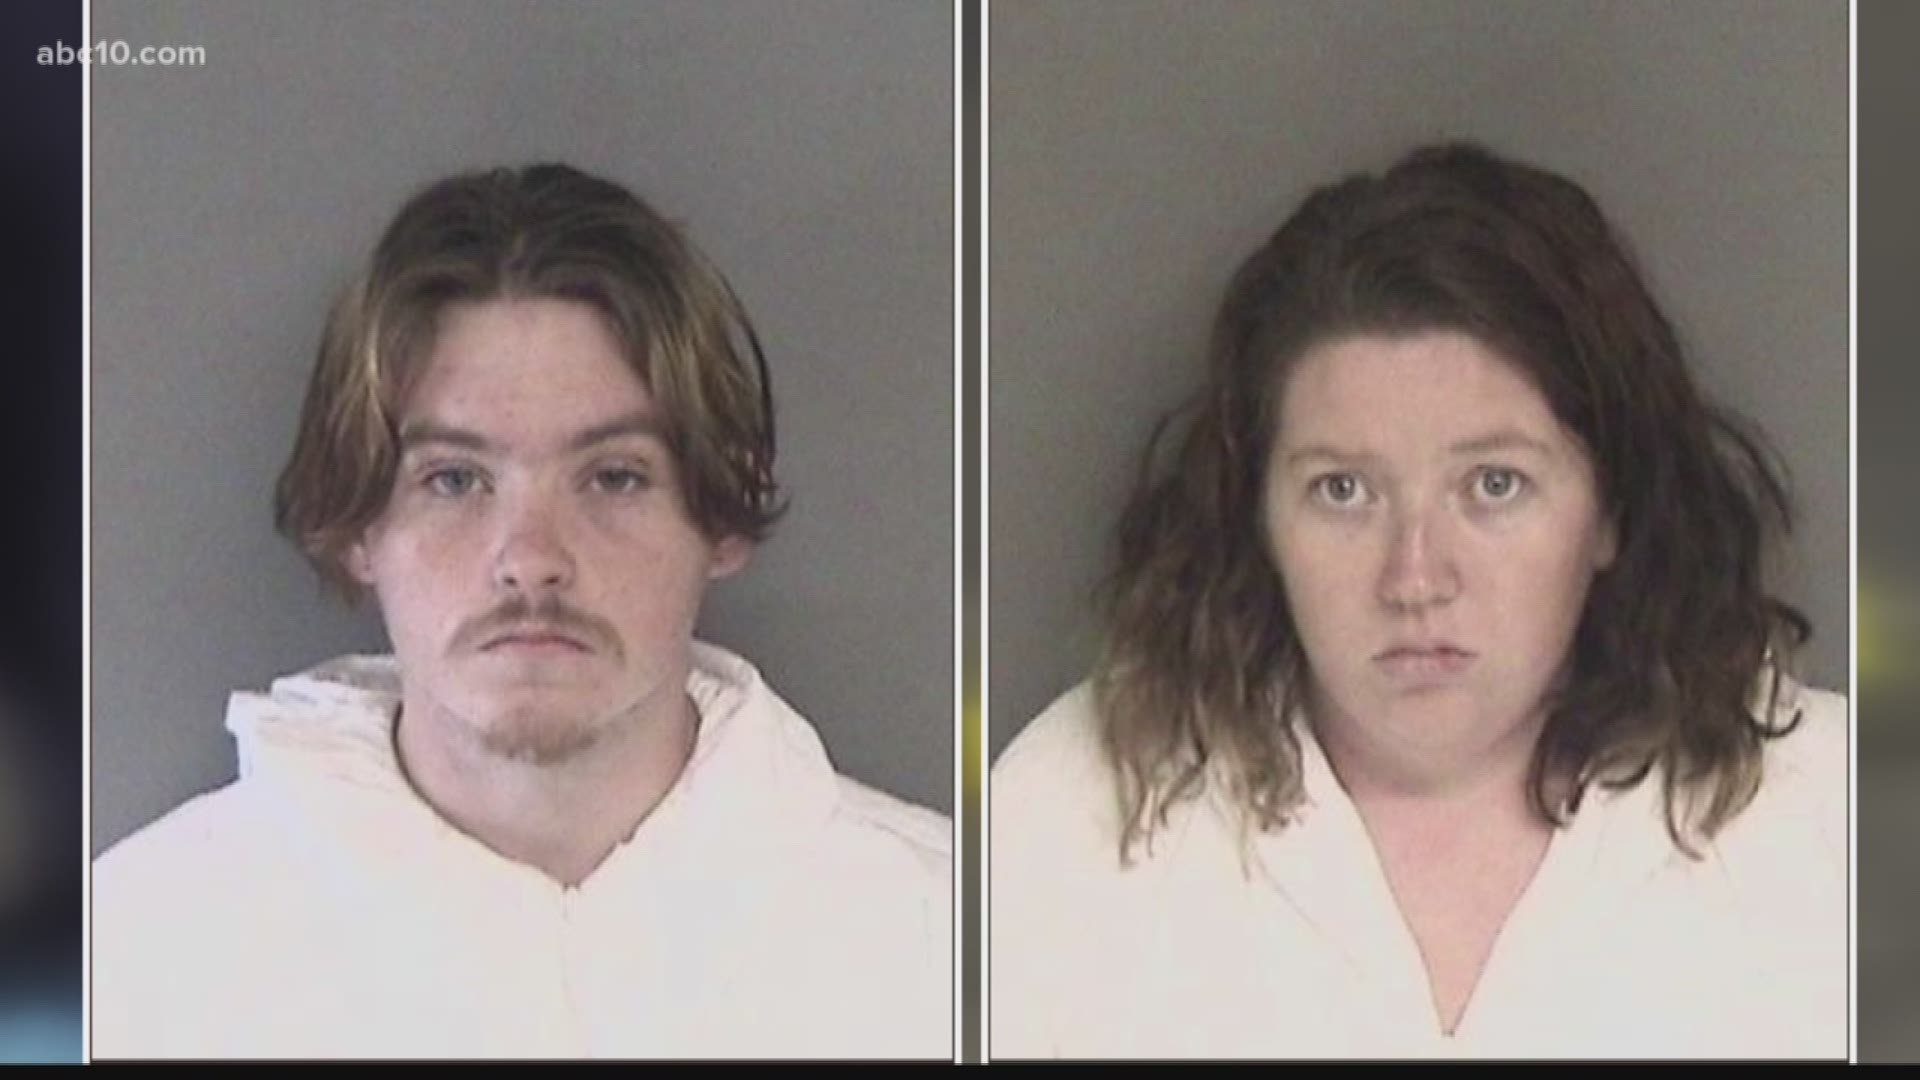 A man and woman arrested in the fatal stabbing of a 19-year-old woman found by a motorist along a California road were friends of the victim, an official said Tuesday.